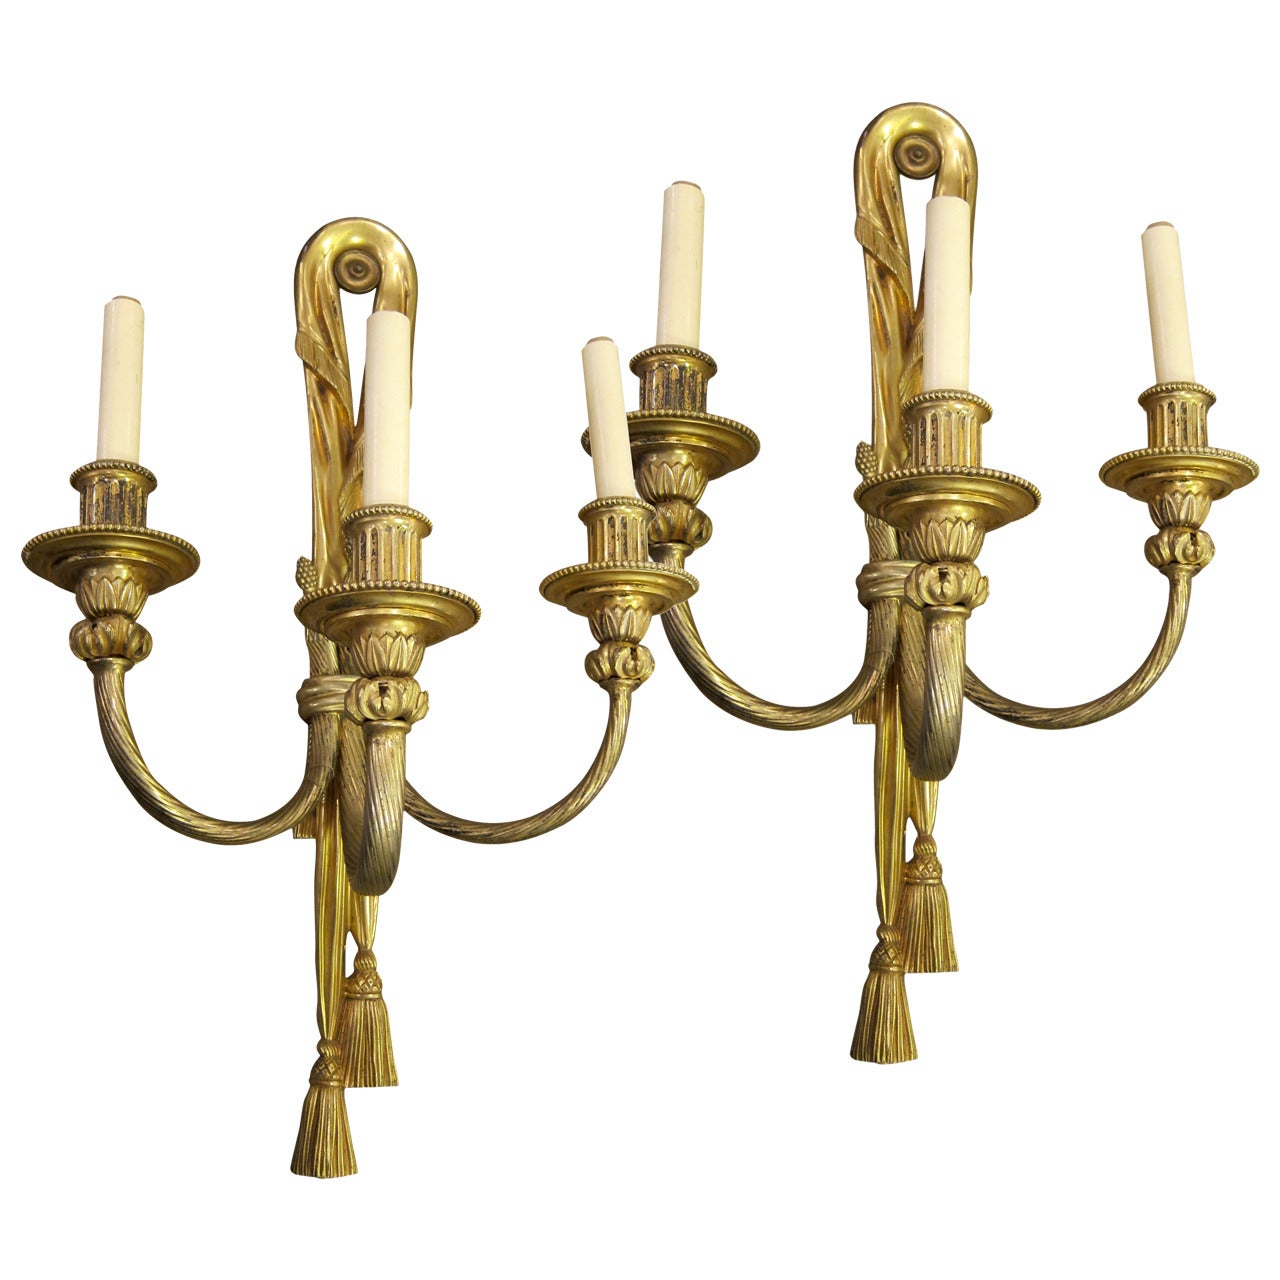 1900s Pair of Three-Light French Gilt Bronze Neoclassical Sconces